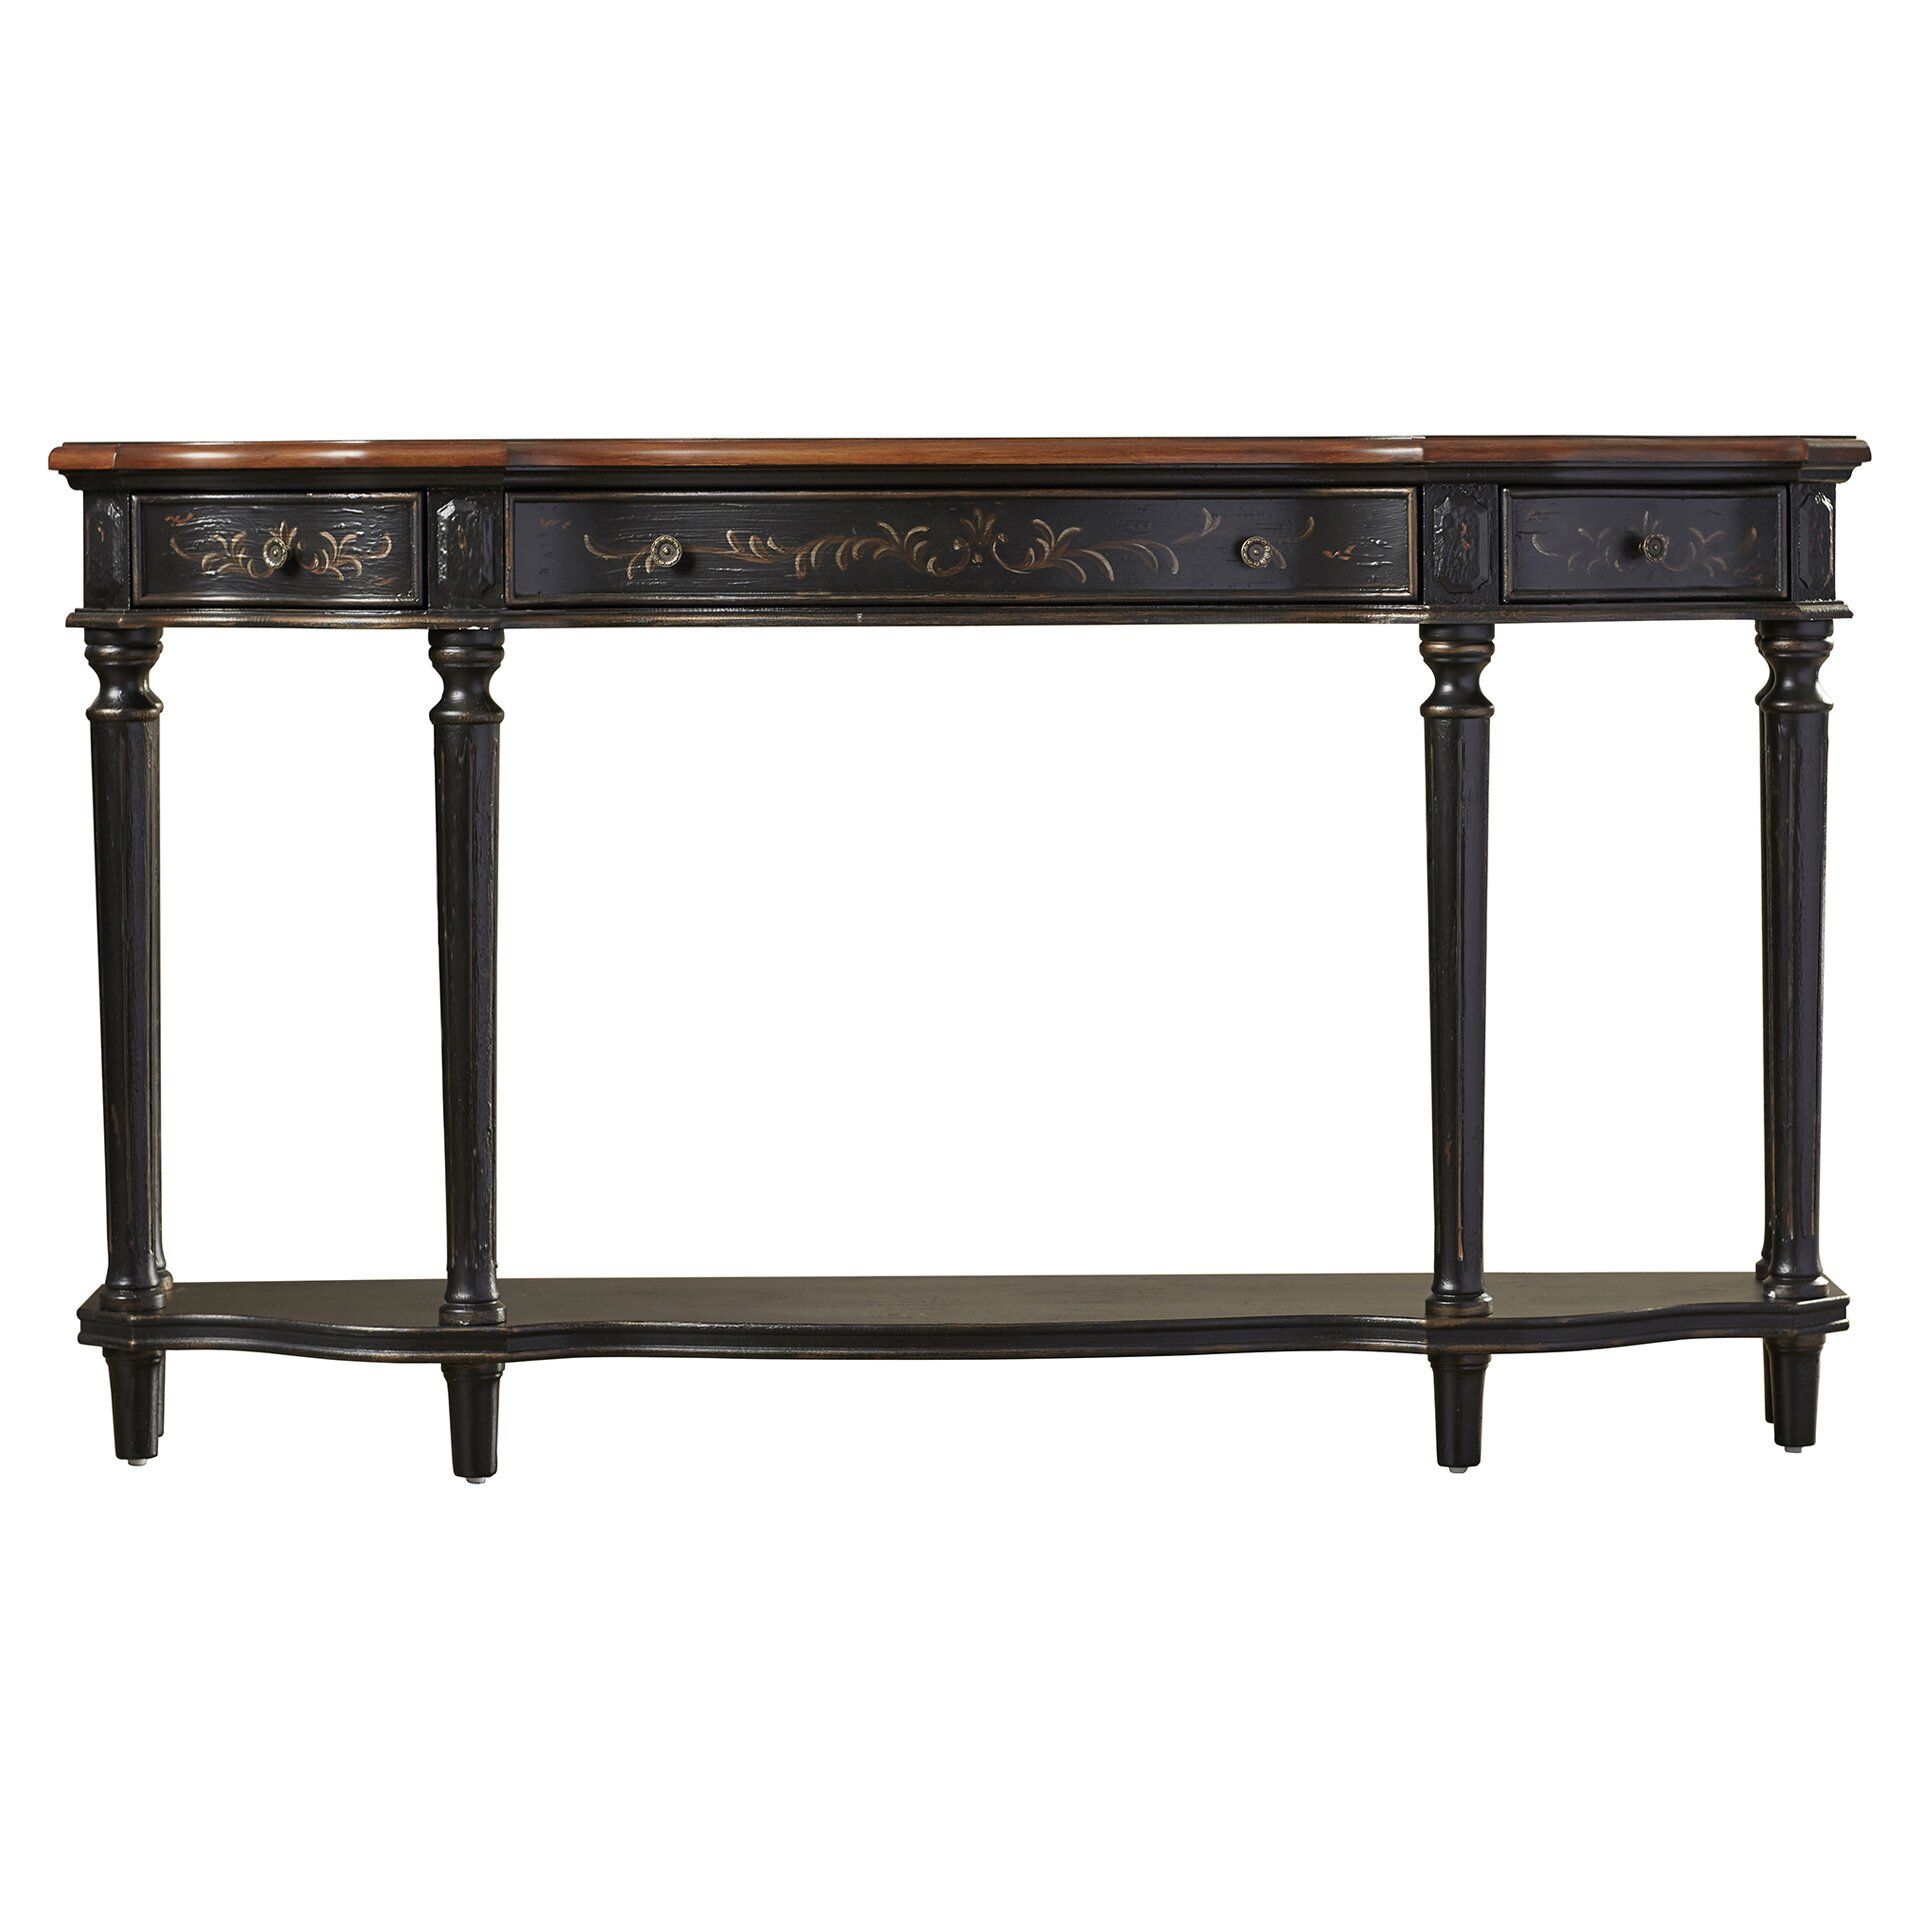 Rosalind Wheeler Pinehill Antique Console Table & Reviews | Wayfair With Regard To Antique Silver Metal Console Tables (View 6 of 20)